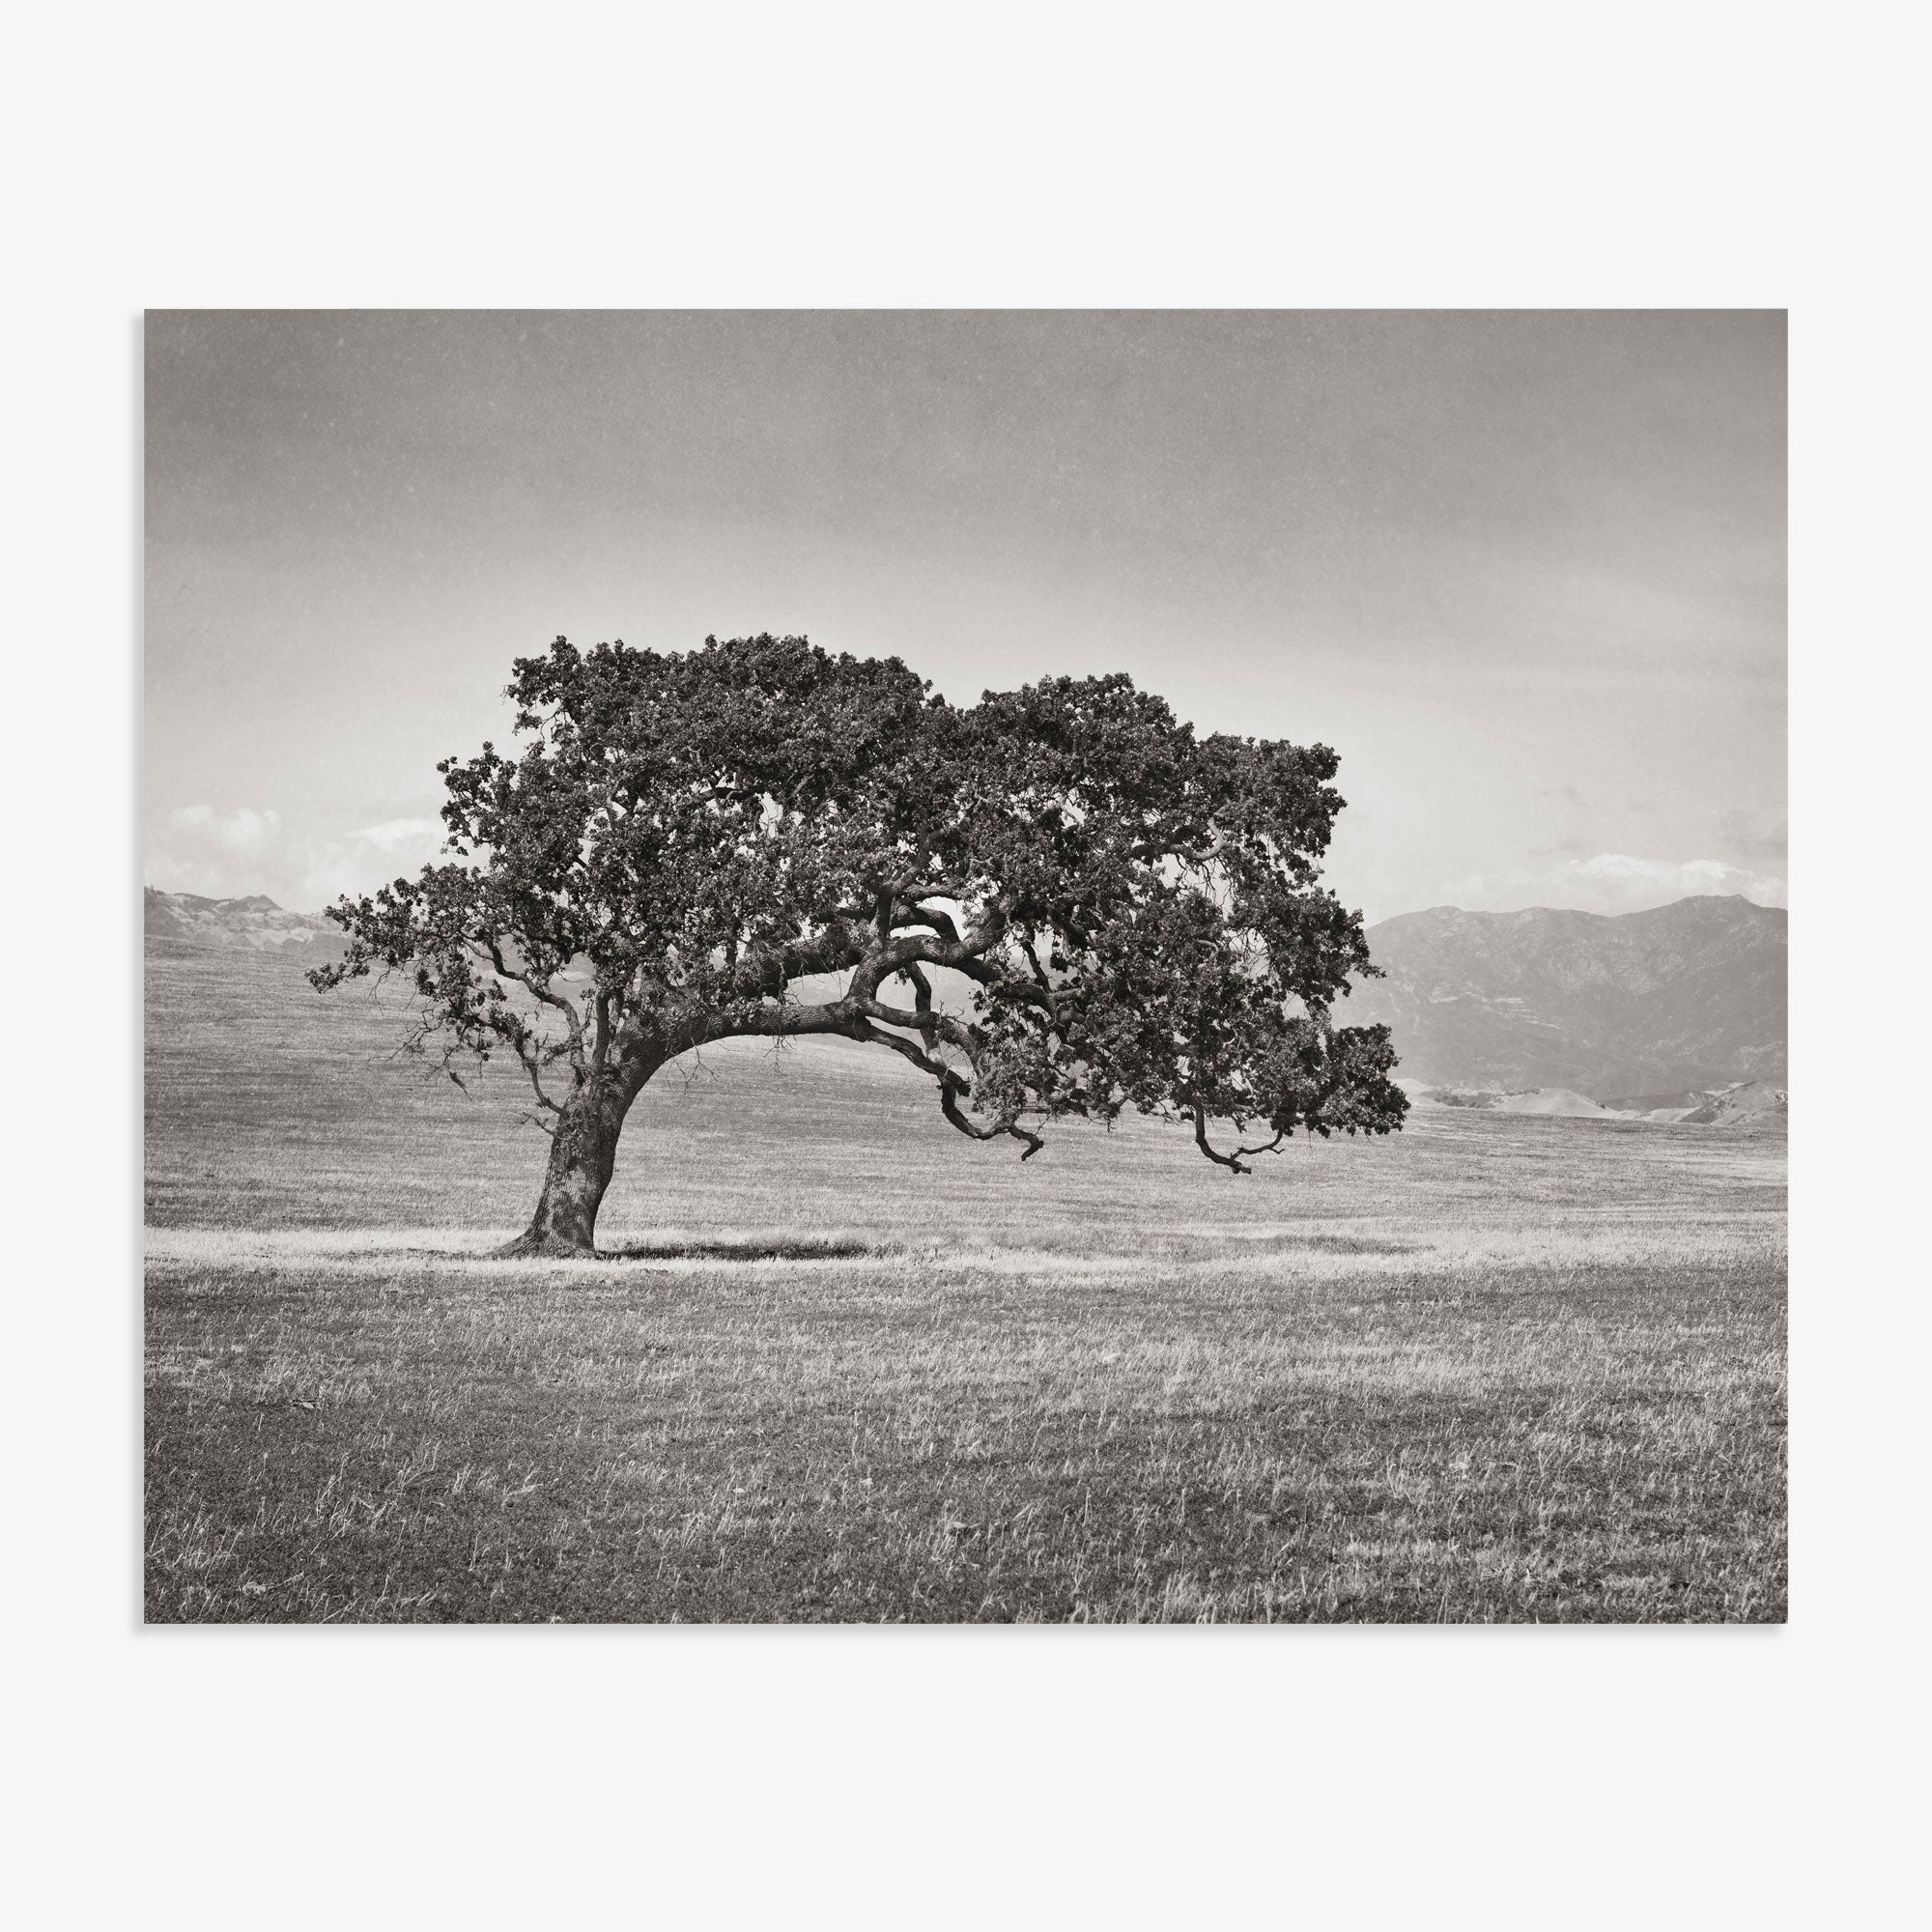 A solitary, gnarled Offley Green Californian Oak Tree Landscape, &#39;Windswept (Black and White)&#39; stands in a vast, open field of the Santa Ynez Valley with distant mountains under a cloudy sky, captured in a black and white photograph.